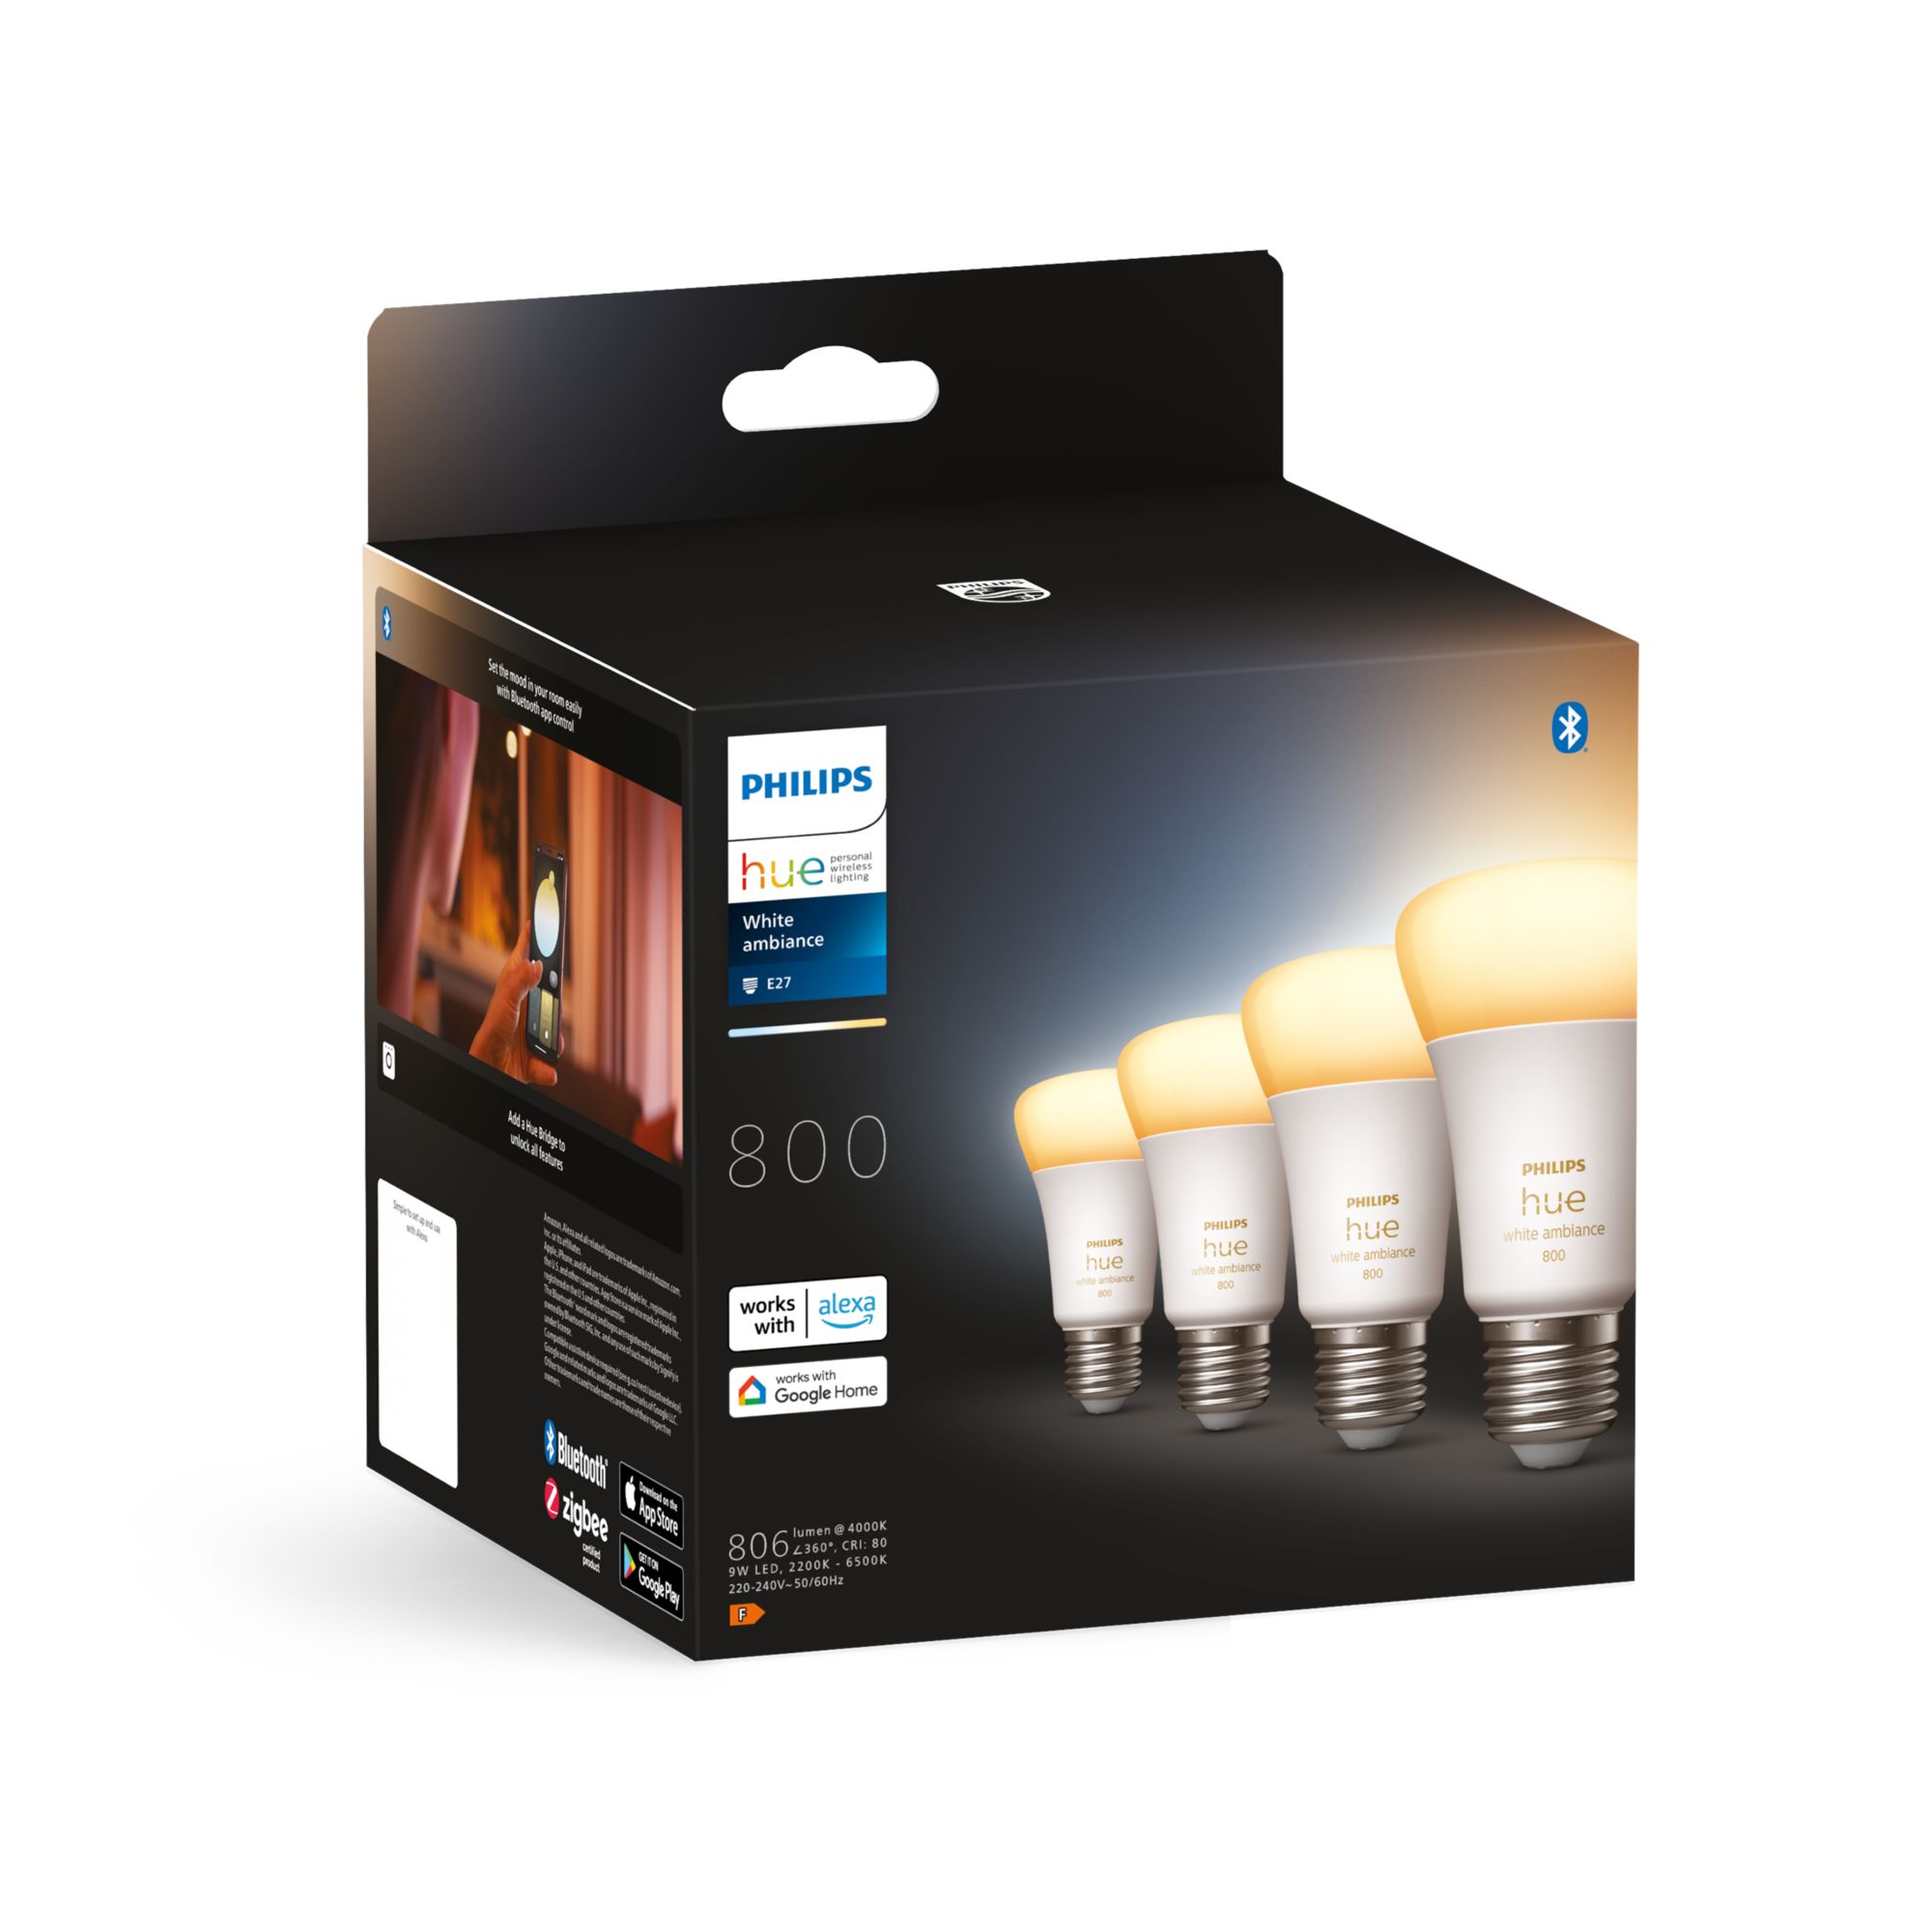 Philips by Signify Hue White ambiance 4 Lampadine Smart E27 60 W [8719514328280]